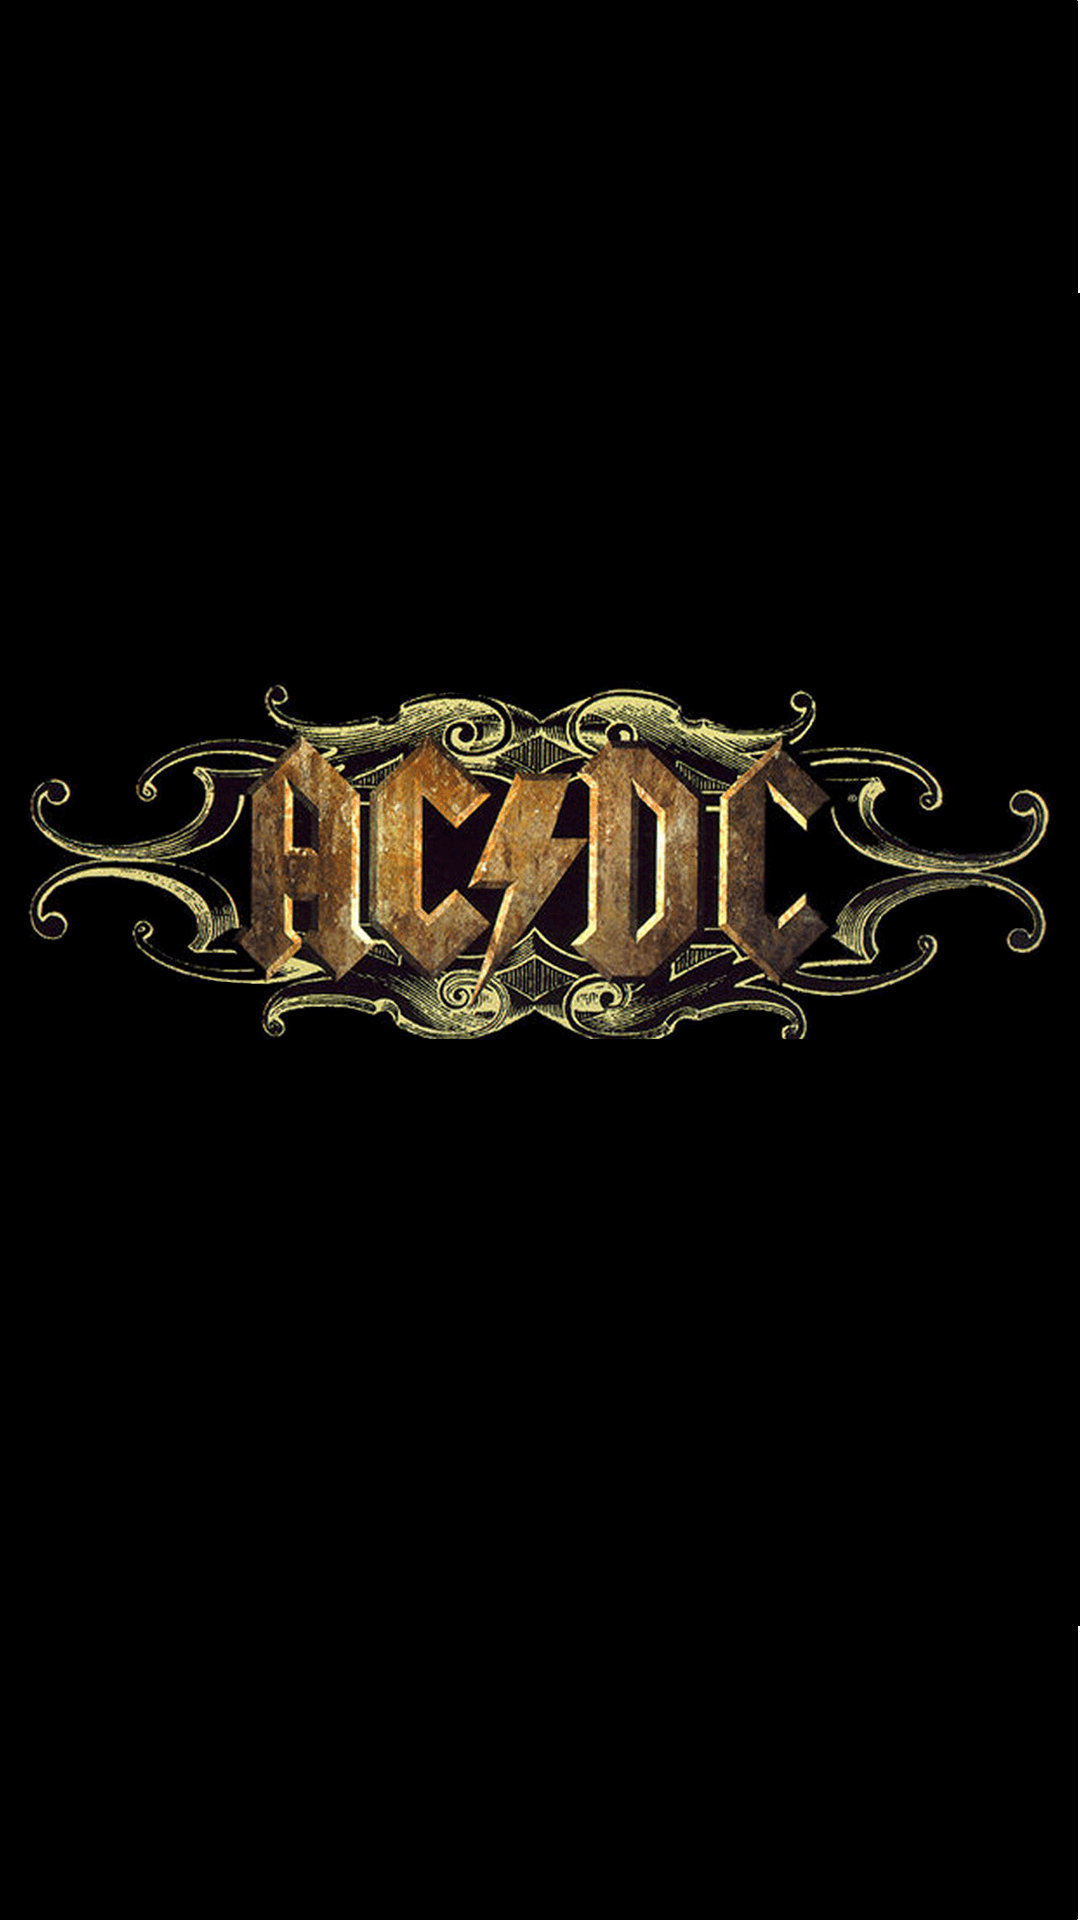 ACDC Rock Band Logo iPhone 6 Plus HD Wallpaper HD Download